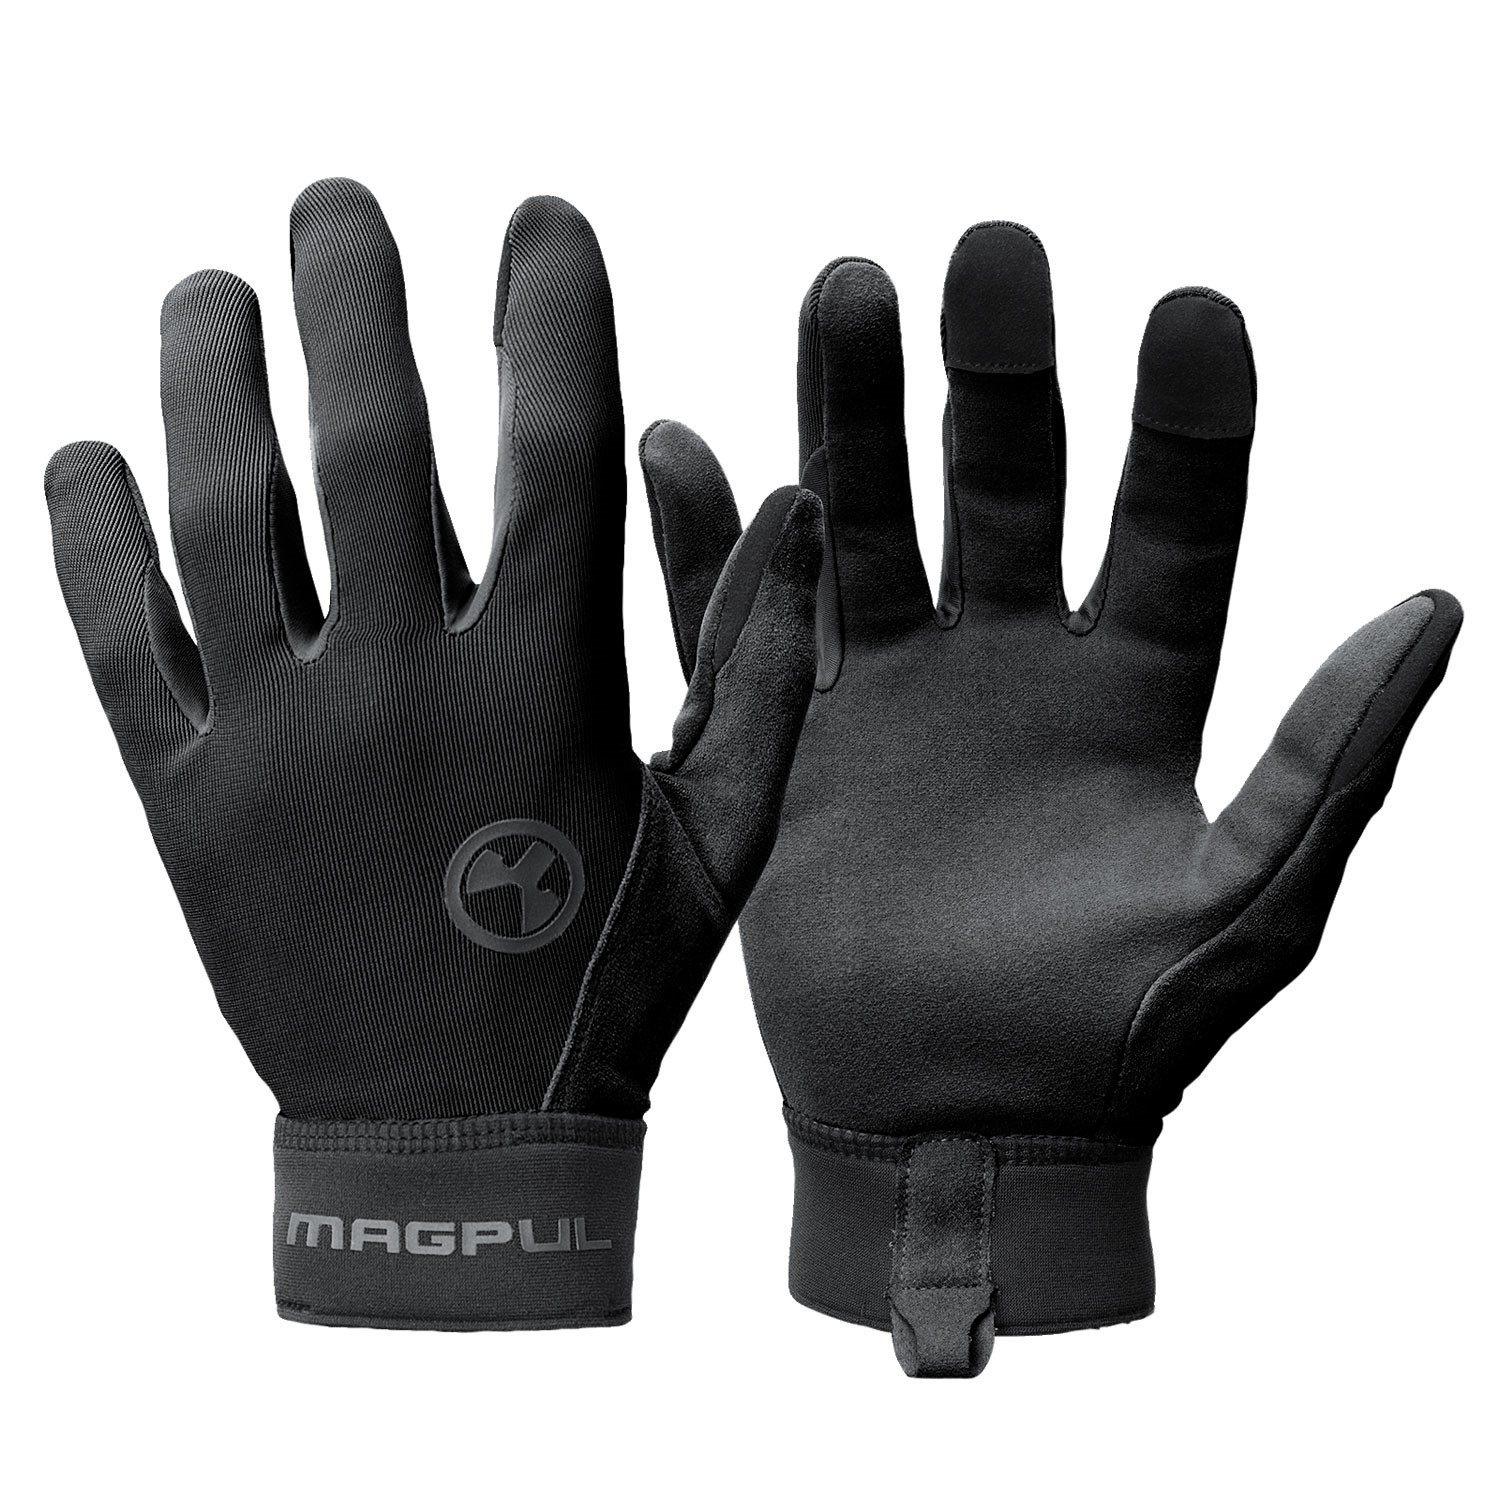 MAGPUL TECHNICAL GLOVES, XL, BLACK, HAS TOUCHSCREEN CAPABLE FINGER TIPS.